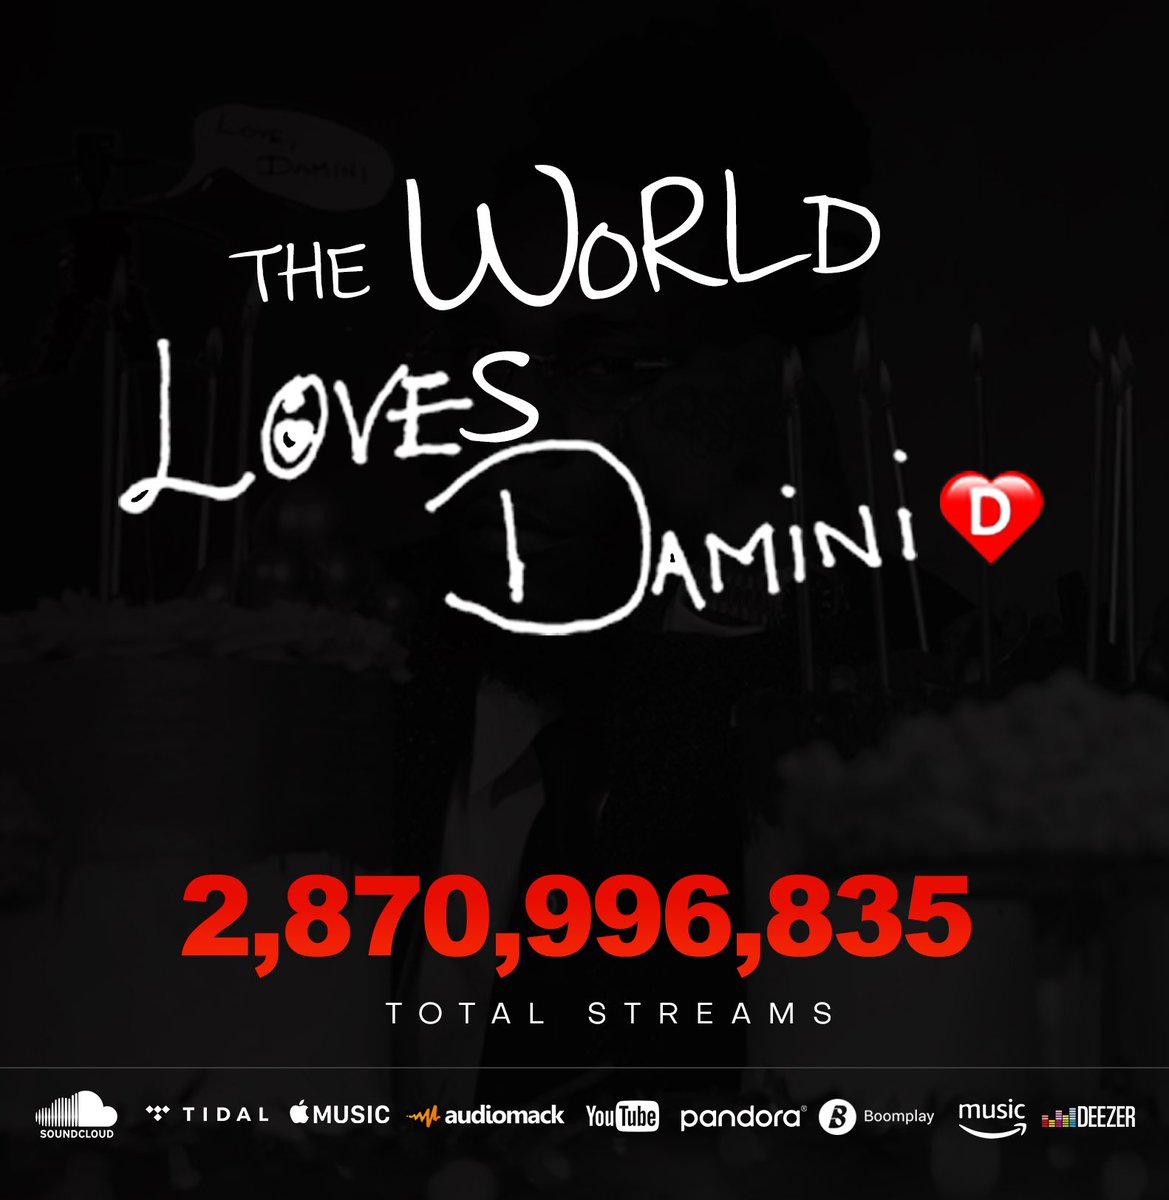 Love Damini the Album is a Year Old Today!!!  
Lots of Milestones Achieved and Records Broken!!
Just Want to Say Thank You All for your Support!!! 
2.9 Billion Streams 💥💥
Celebrating at Citi Field Stadium Tonight!!!

#LOVEDAMINIYEARANNIVERSARY 
#LoveDaminiStadiumTour